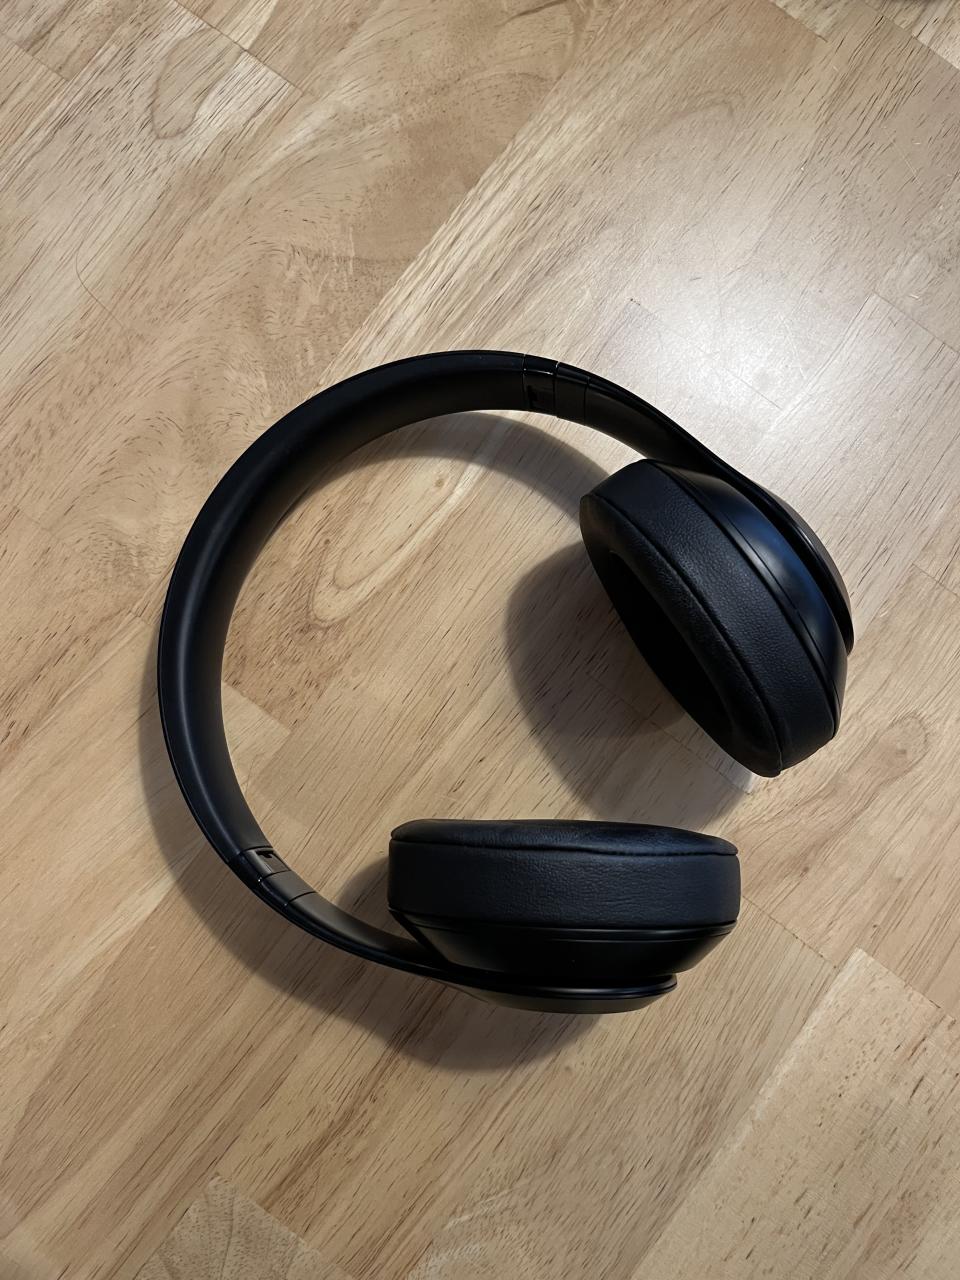 Beats Studio3 Wireless Over-Ear Headphones  review, These noise-cancelling headphones are great for the office, but I have a few suggestions (photo via author).